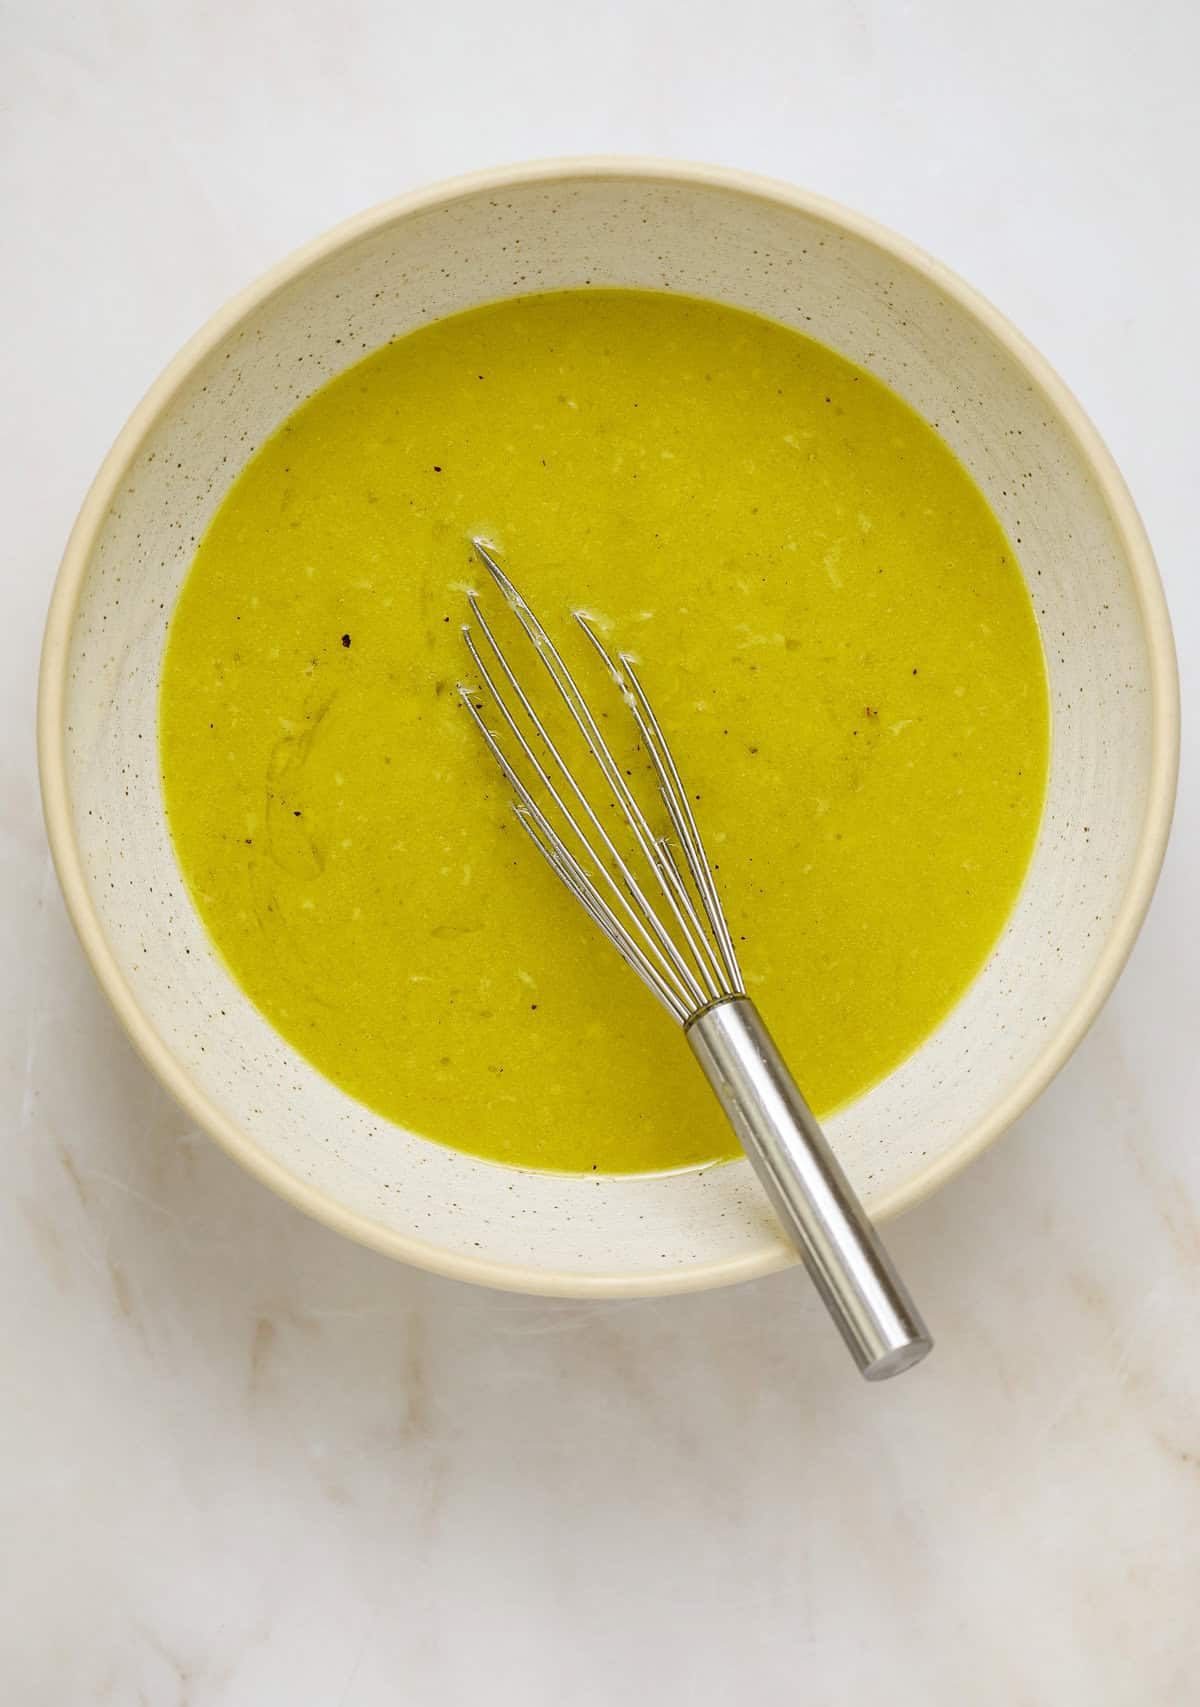 A bright yellow vinaigrette in a ceramic bowl with a metal whisk.